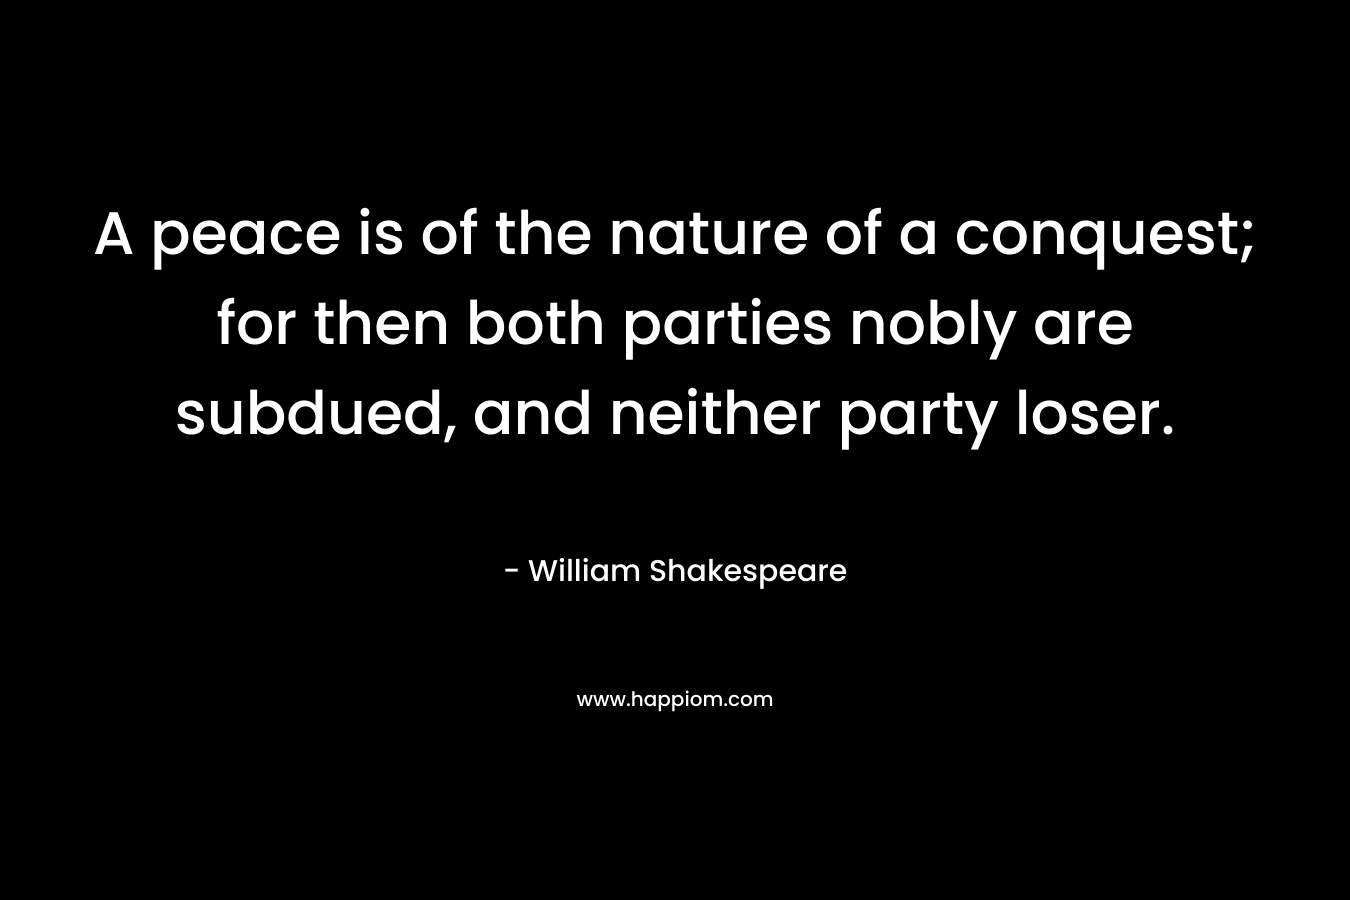 A peace is of the nature of a conquest; for then both parties nobly are subdued, and neither party loser. – William Shakespeare